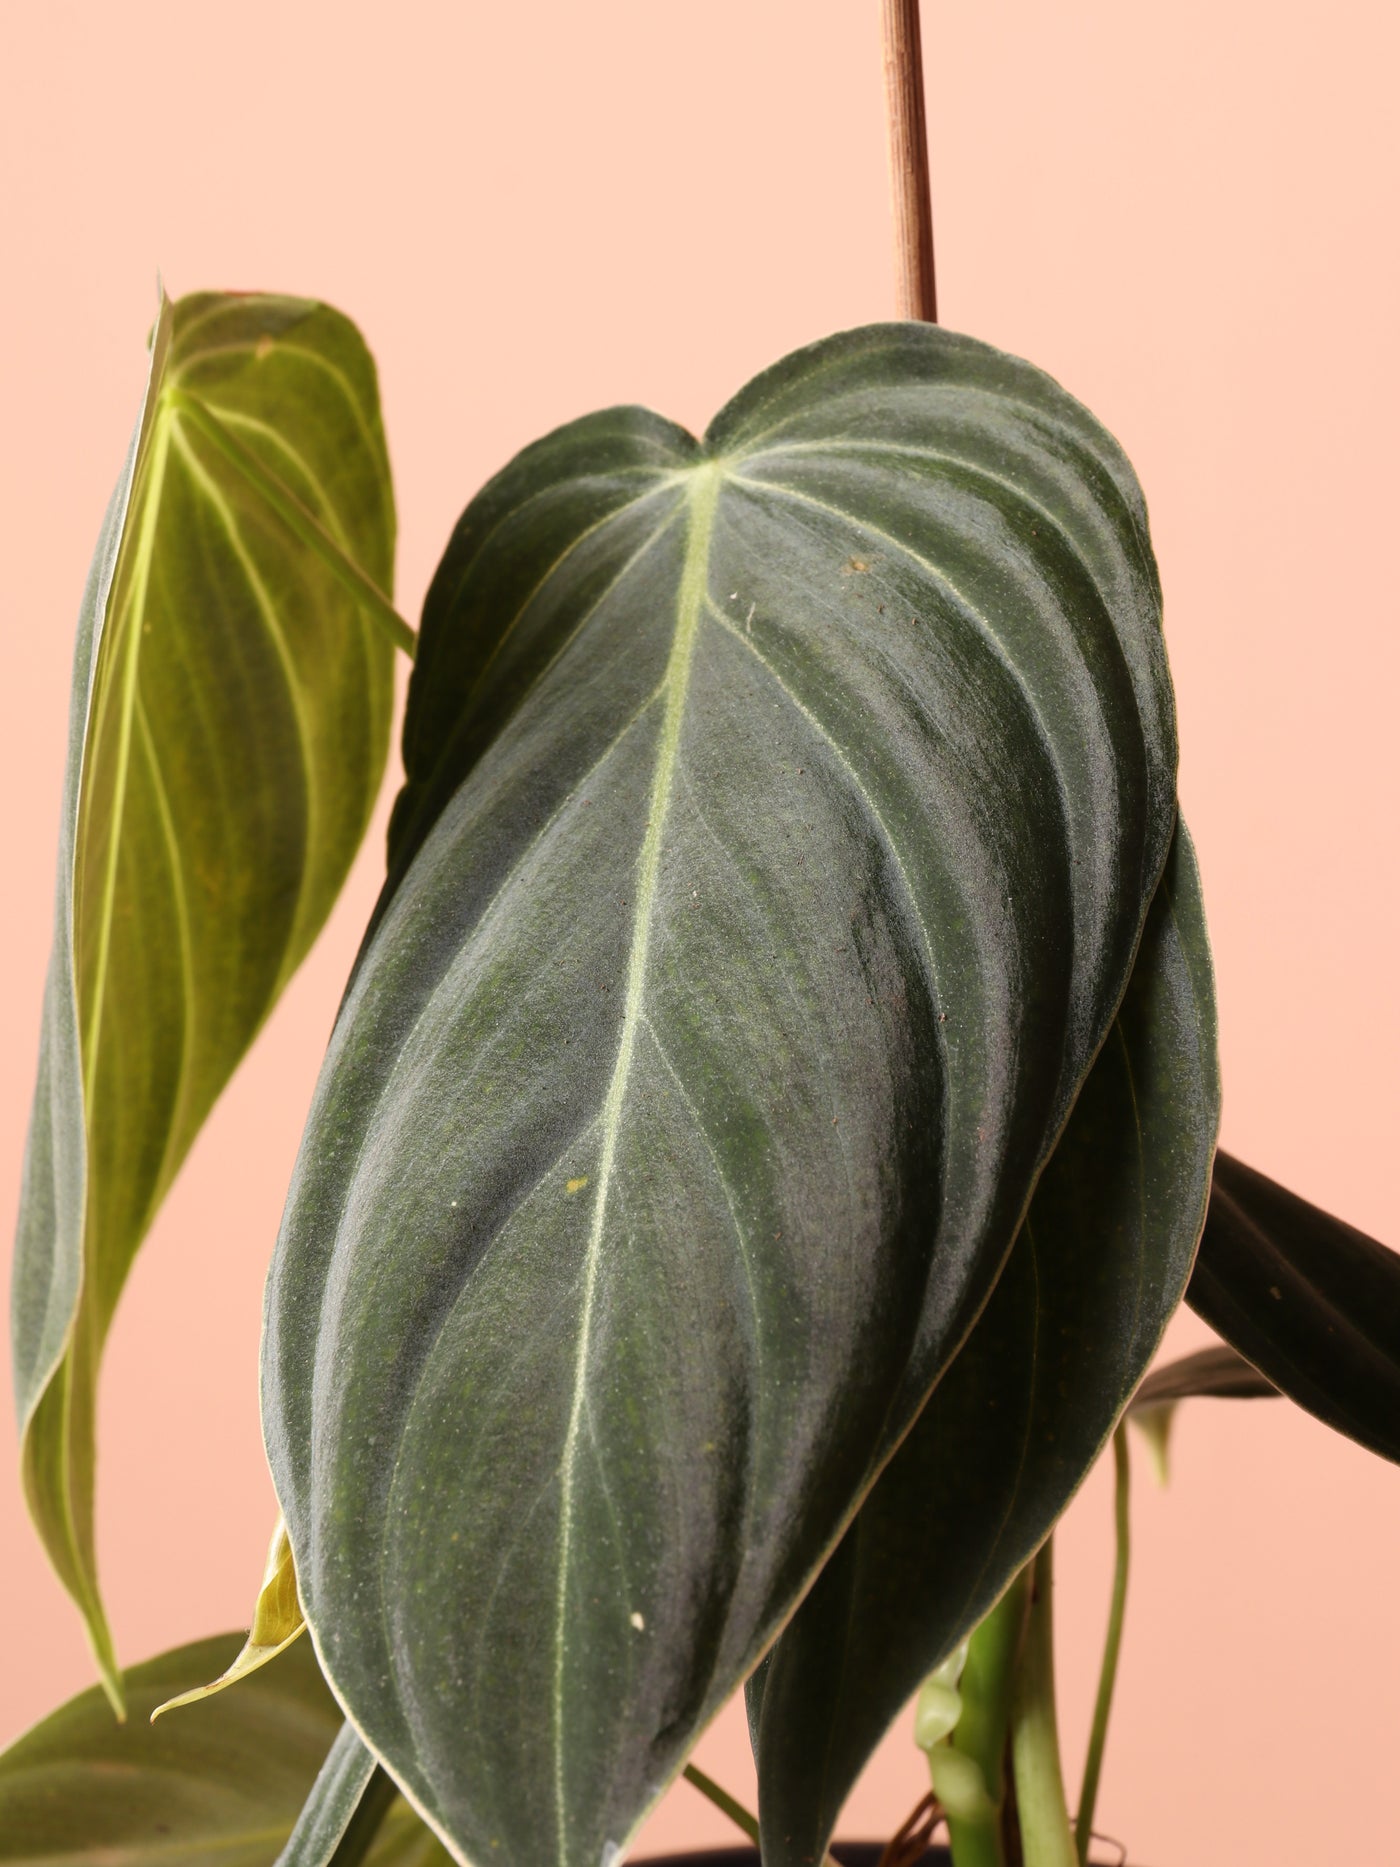 Small Philodendron Micans